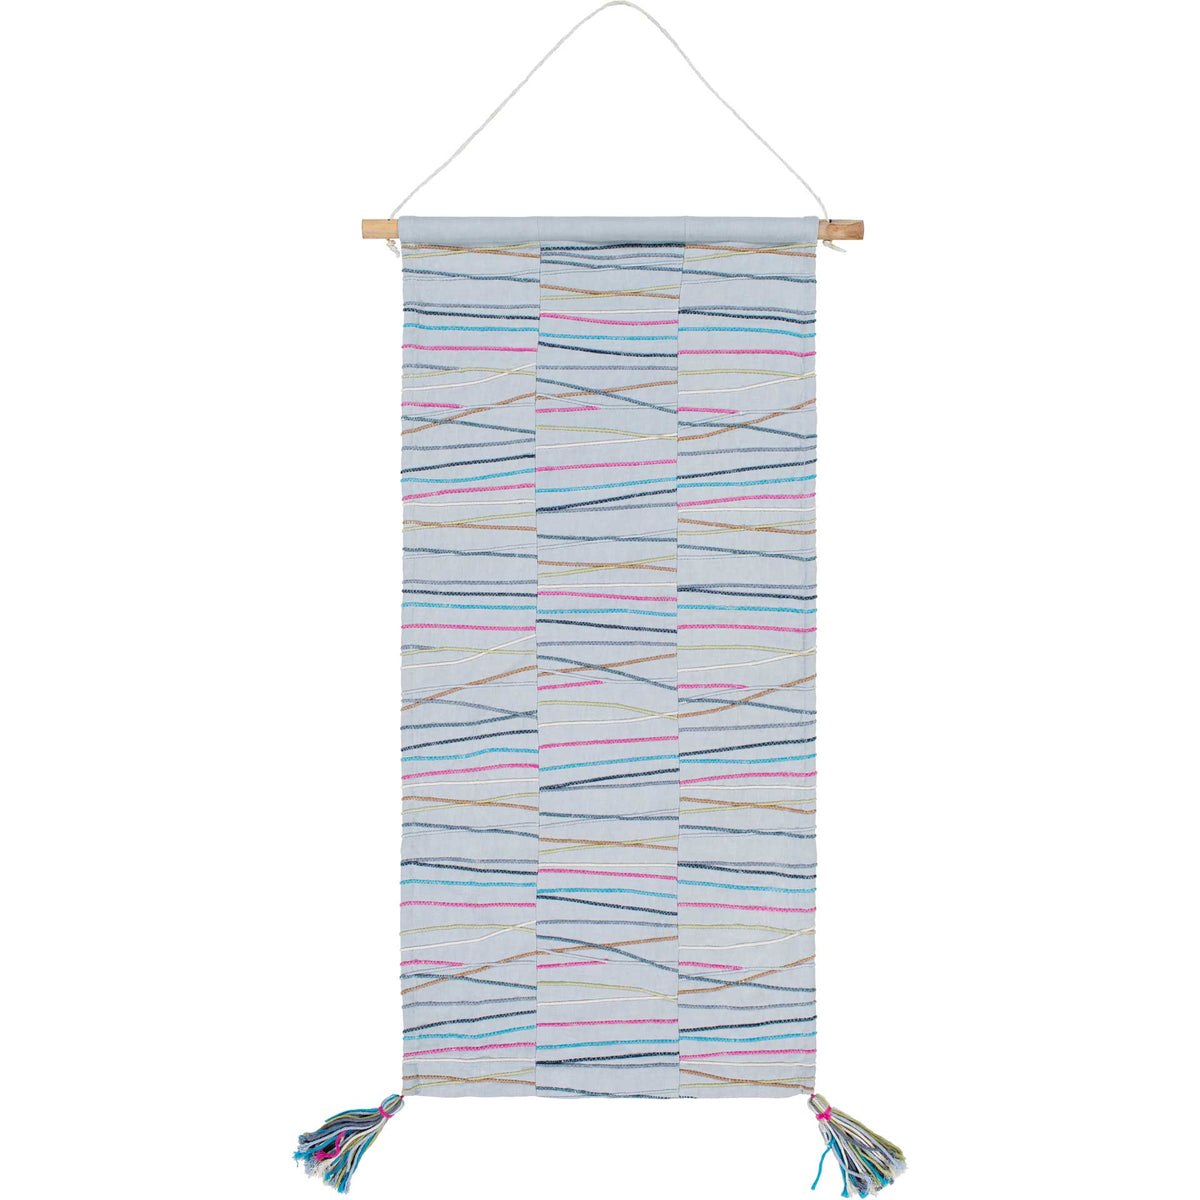 Kade Wall Hanging Ice Blue/Beige/Bright Pink